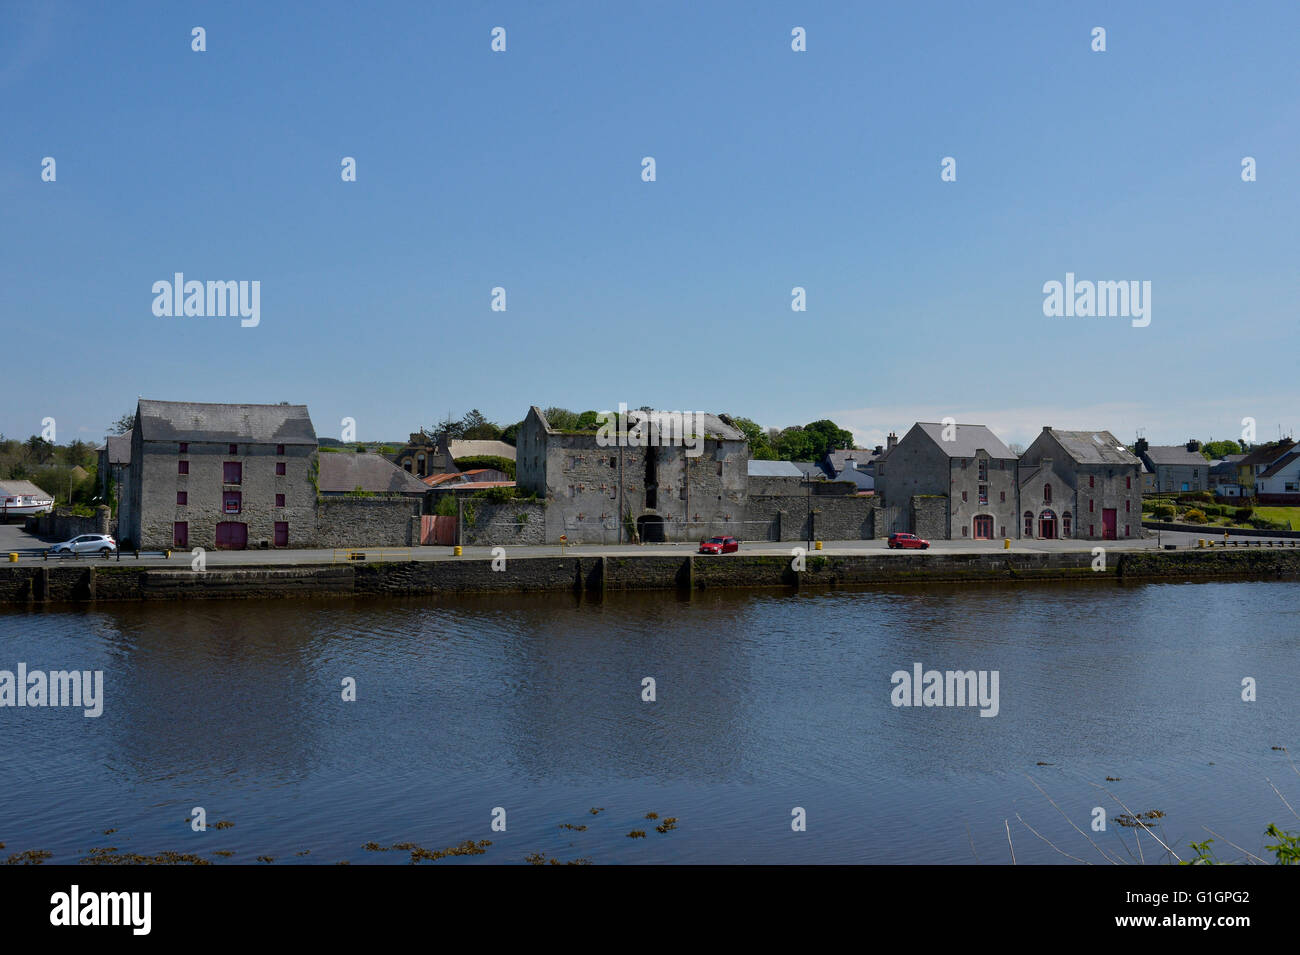 19th century warehouses and River Lennon, Ramelton, County Donegal, Ireland. Stock Photo